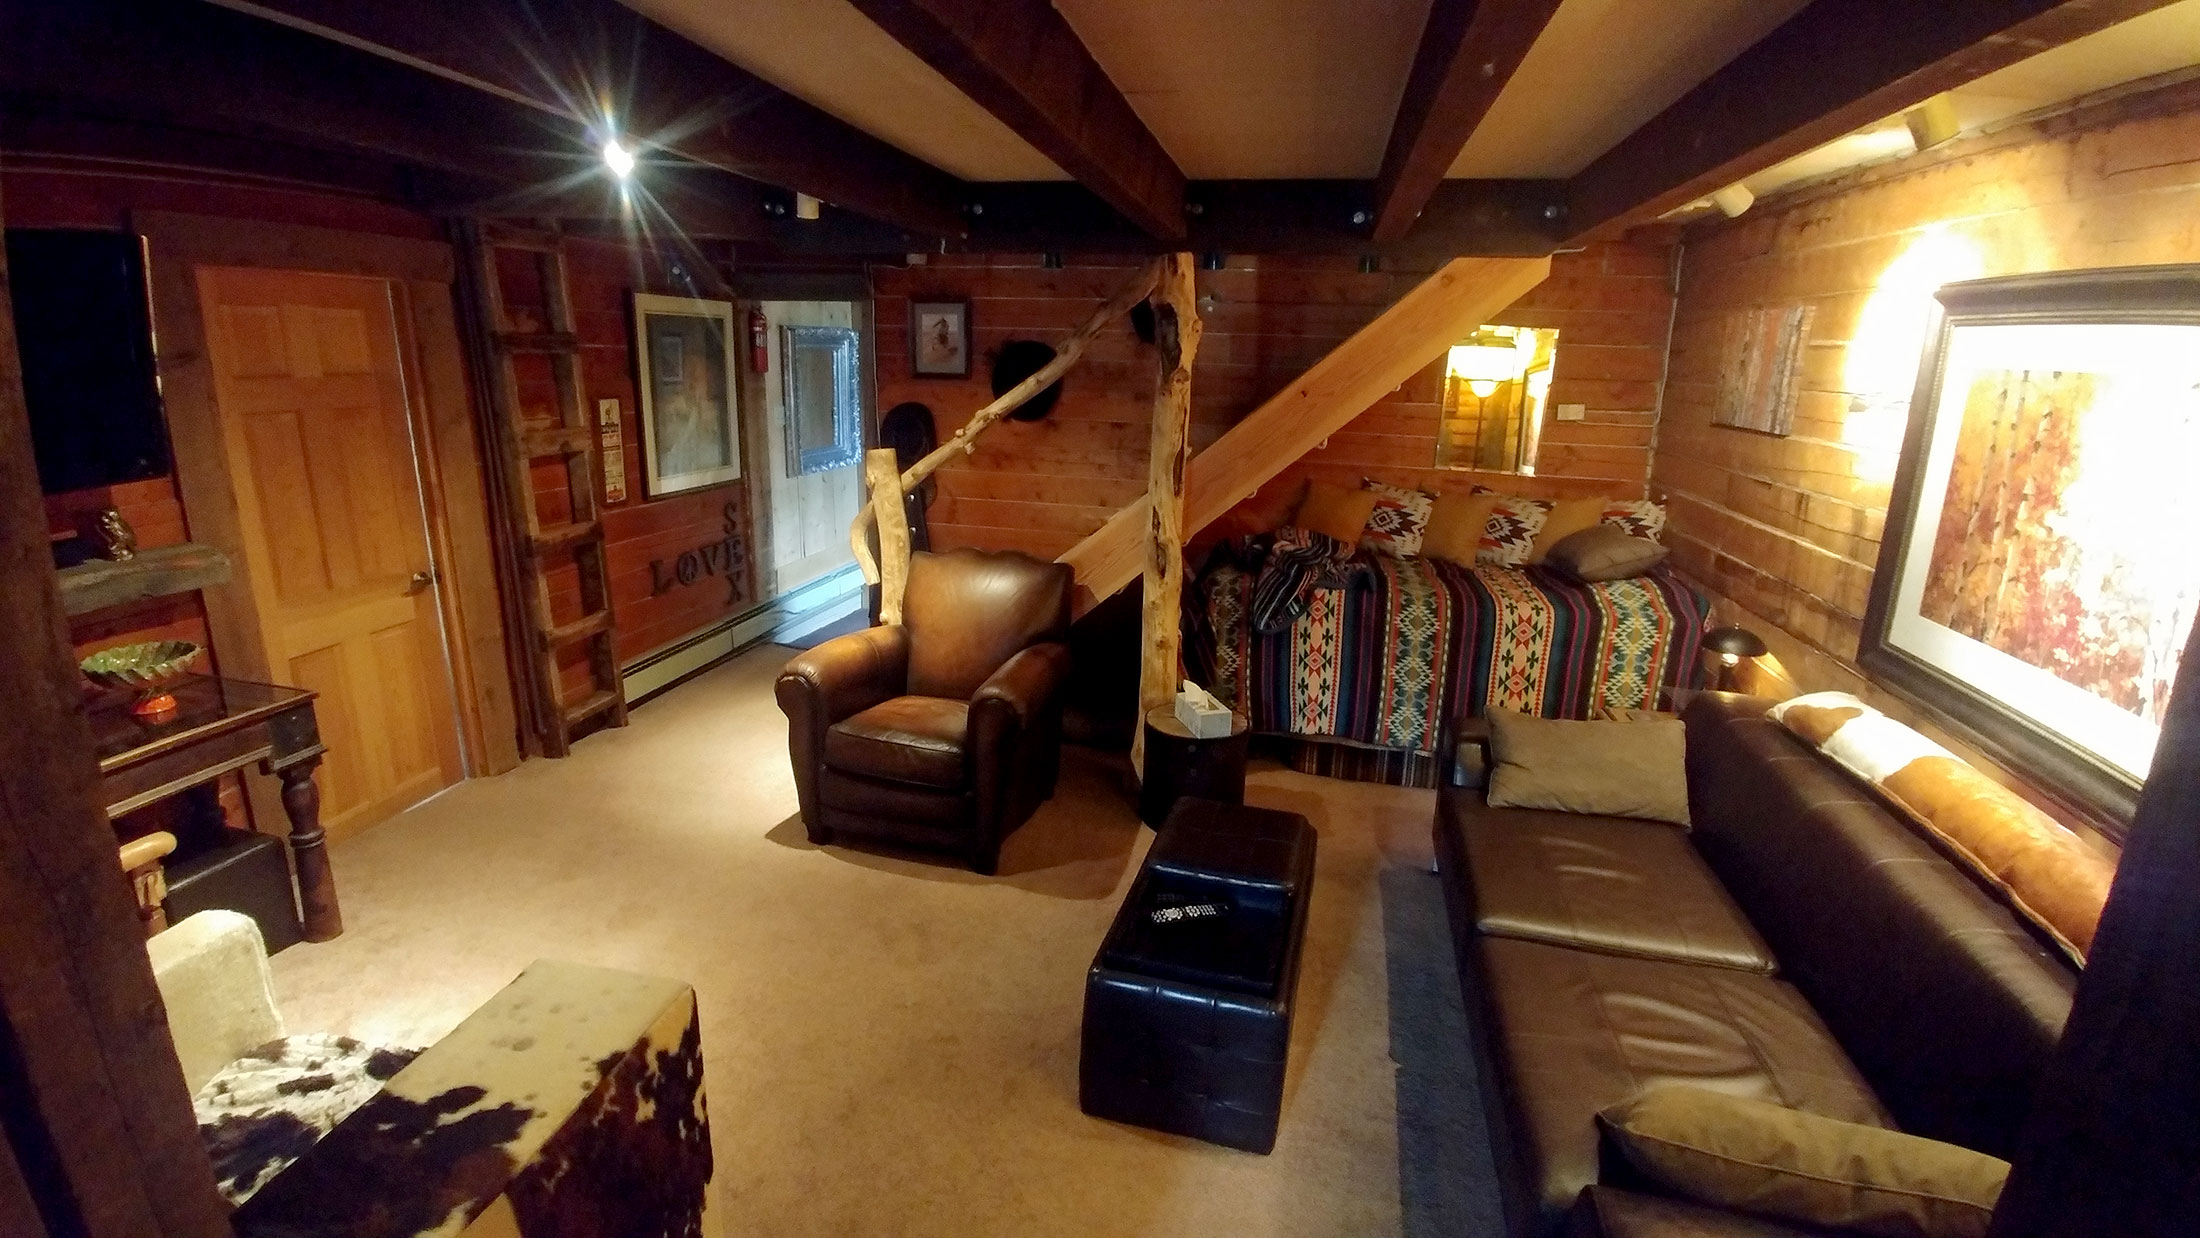 The living room at the Bunk House Lodge in Breckenridge, Colorado.